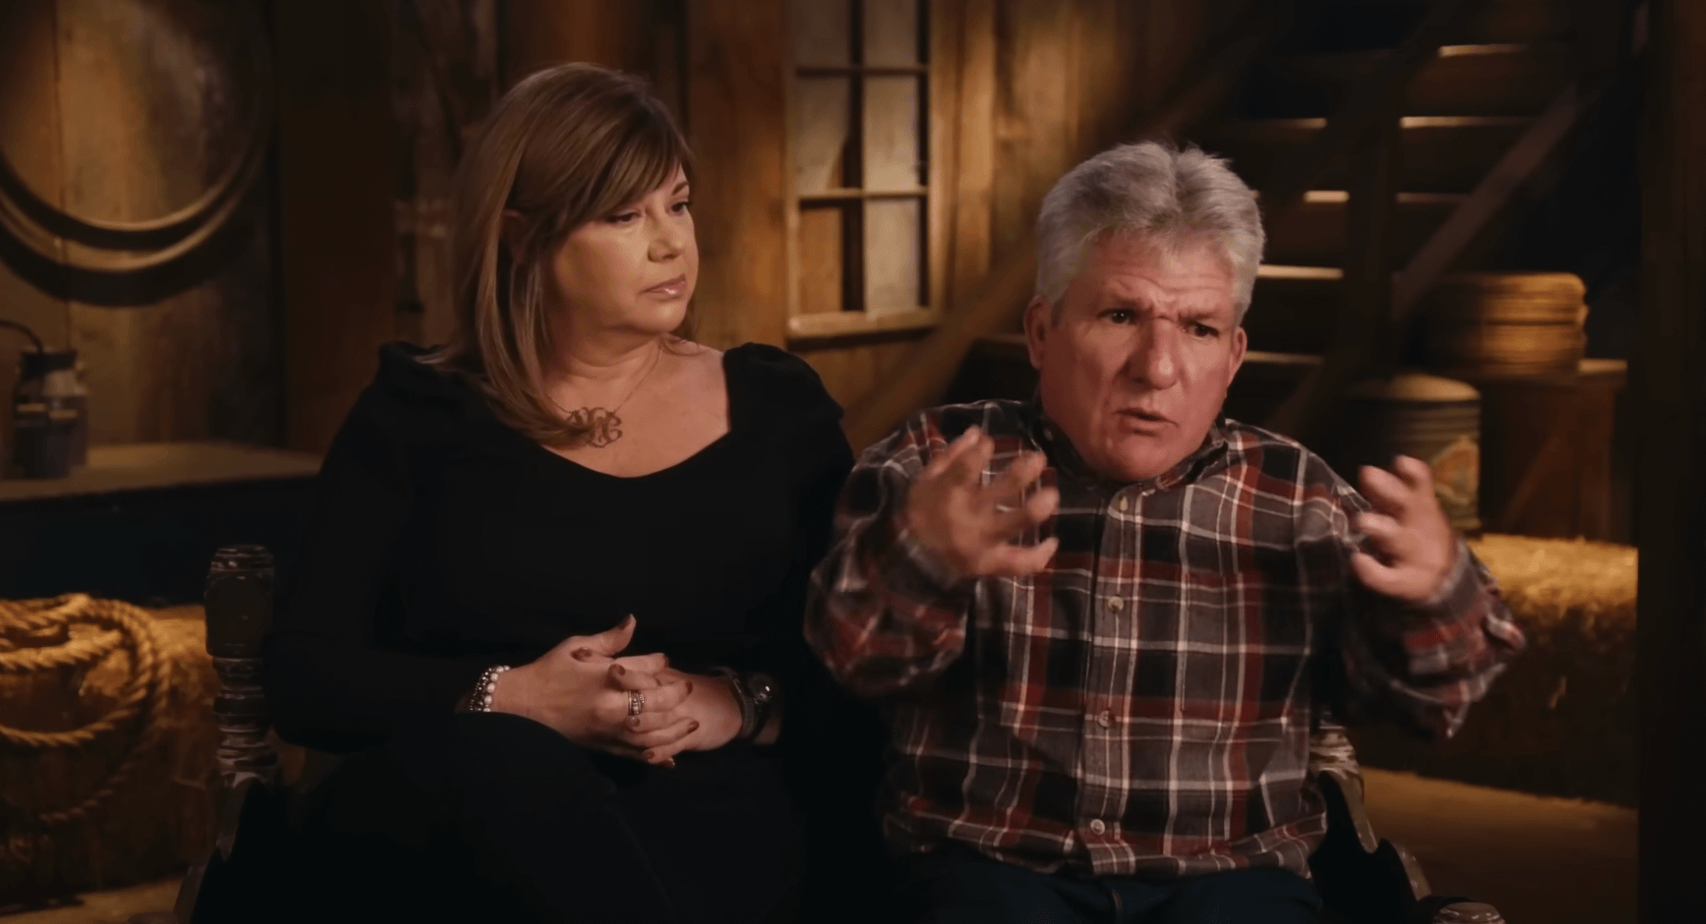 Caryn Chandler and Matt Roloff sitting next to each other in 'Little People, Big World'